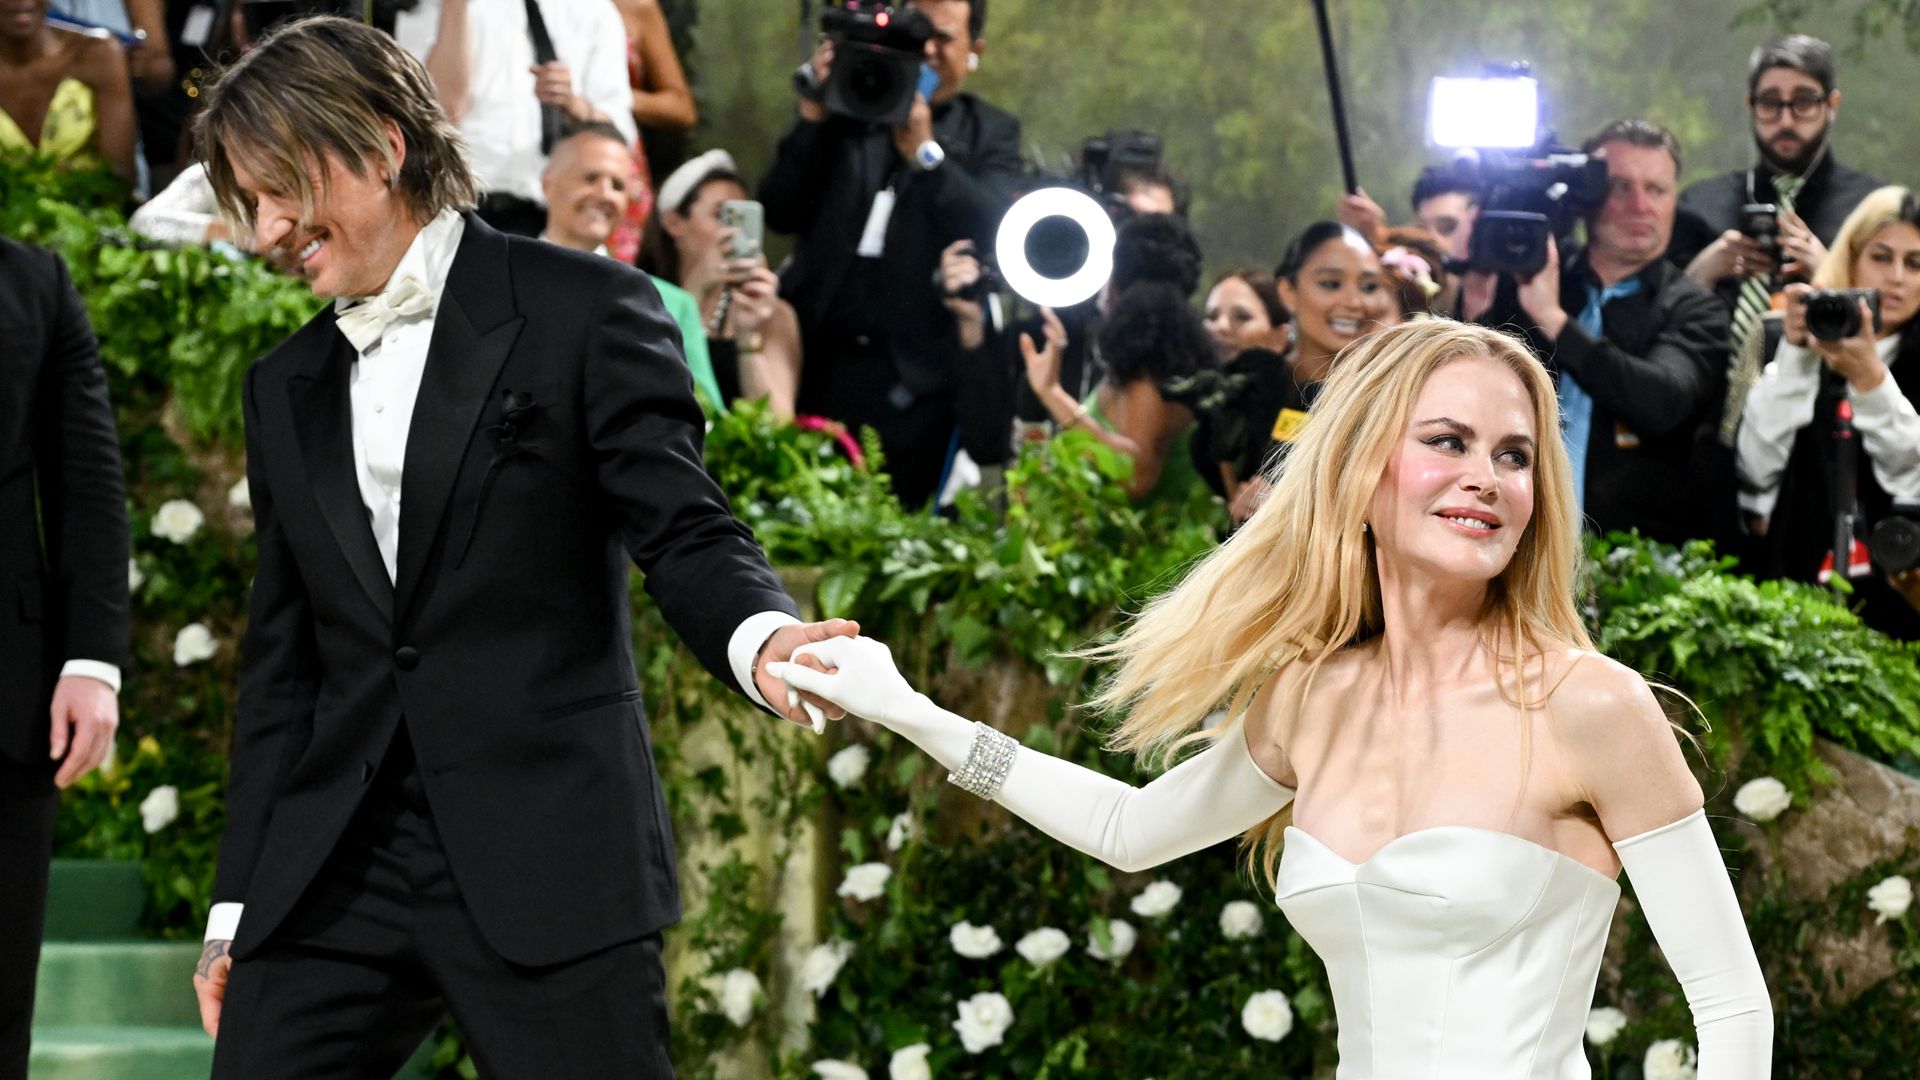 Nicole Kidman wows in strapless Balenciaga gown as she 'looks forward to dancing' with Keith Urban at Met Gala